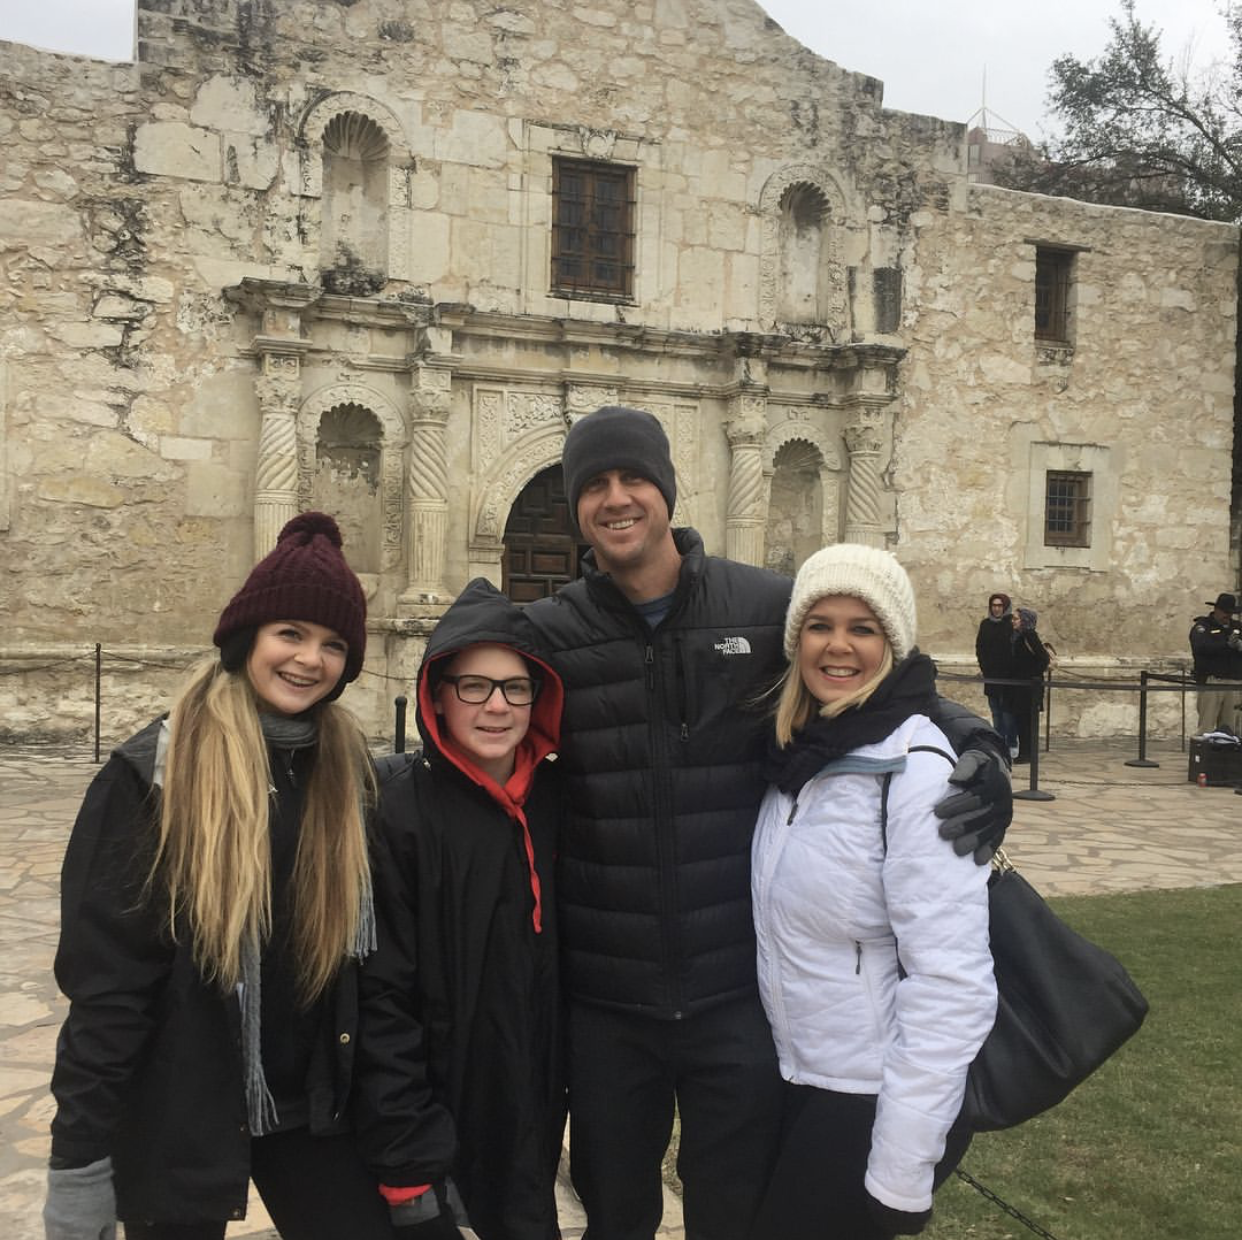 Visiting the Alamo with my family